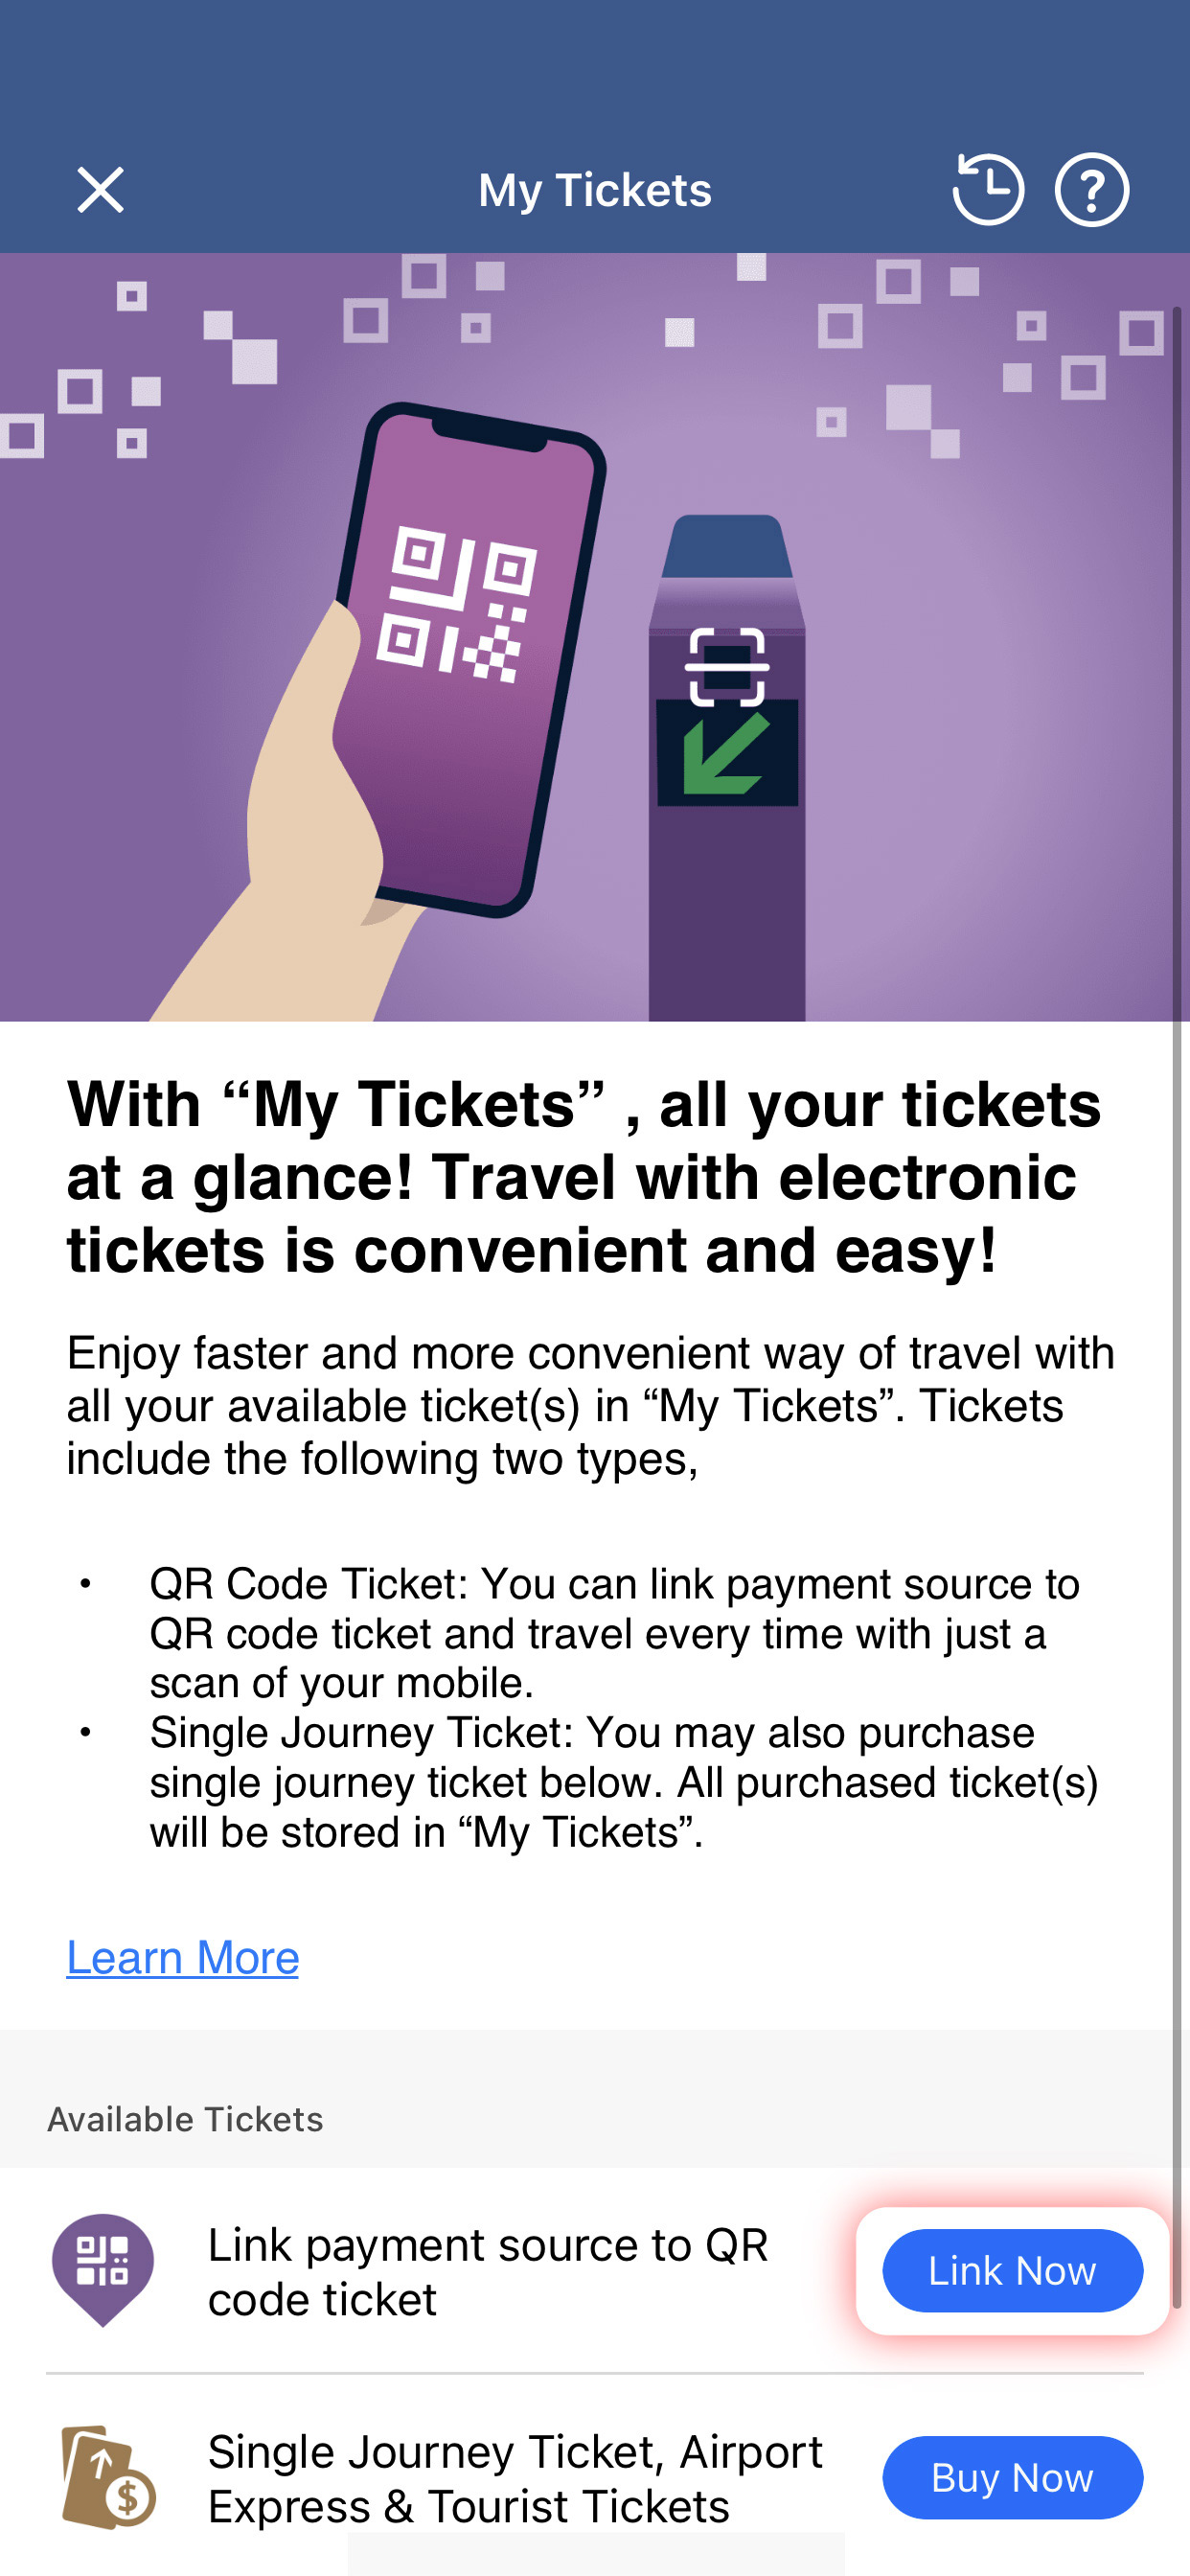 Select 'Link Now' to link payment source to QR code ticket